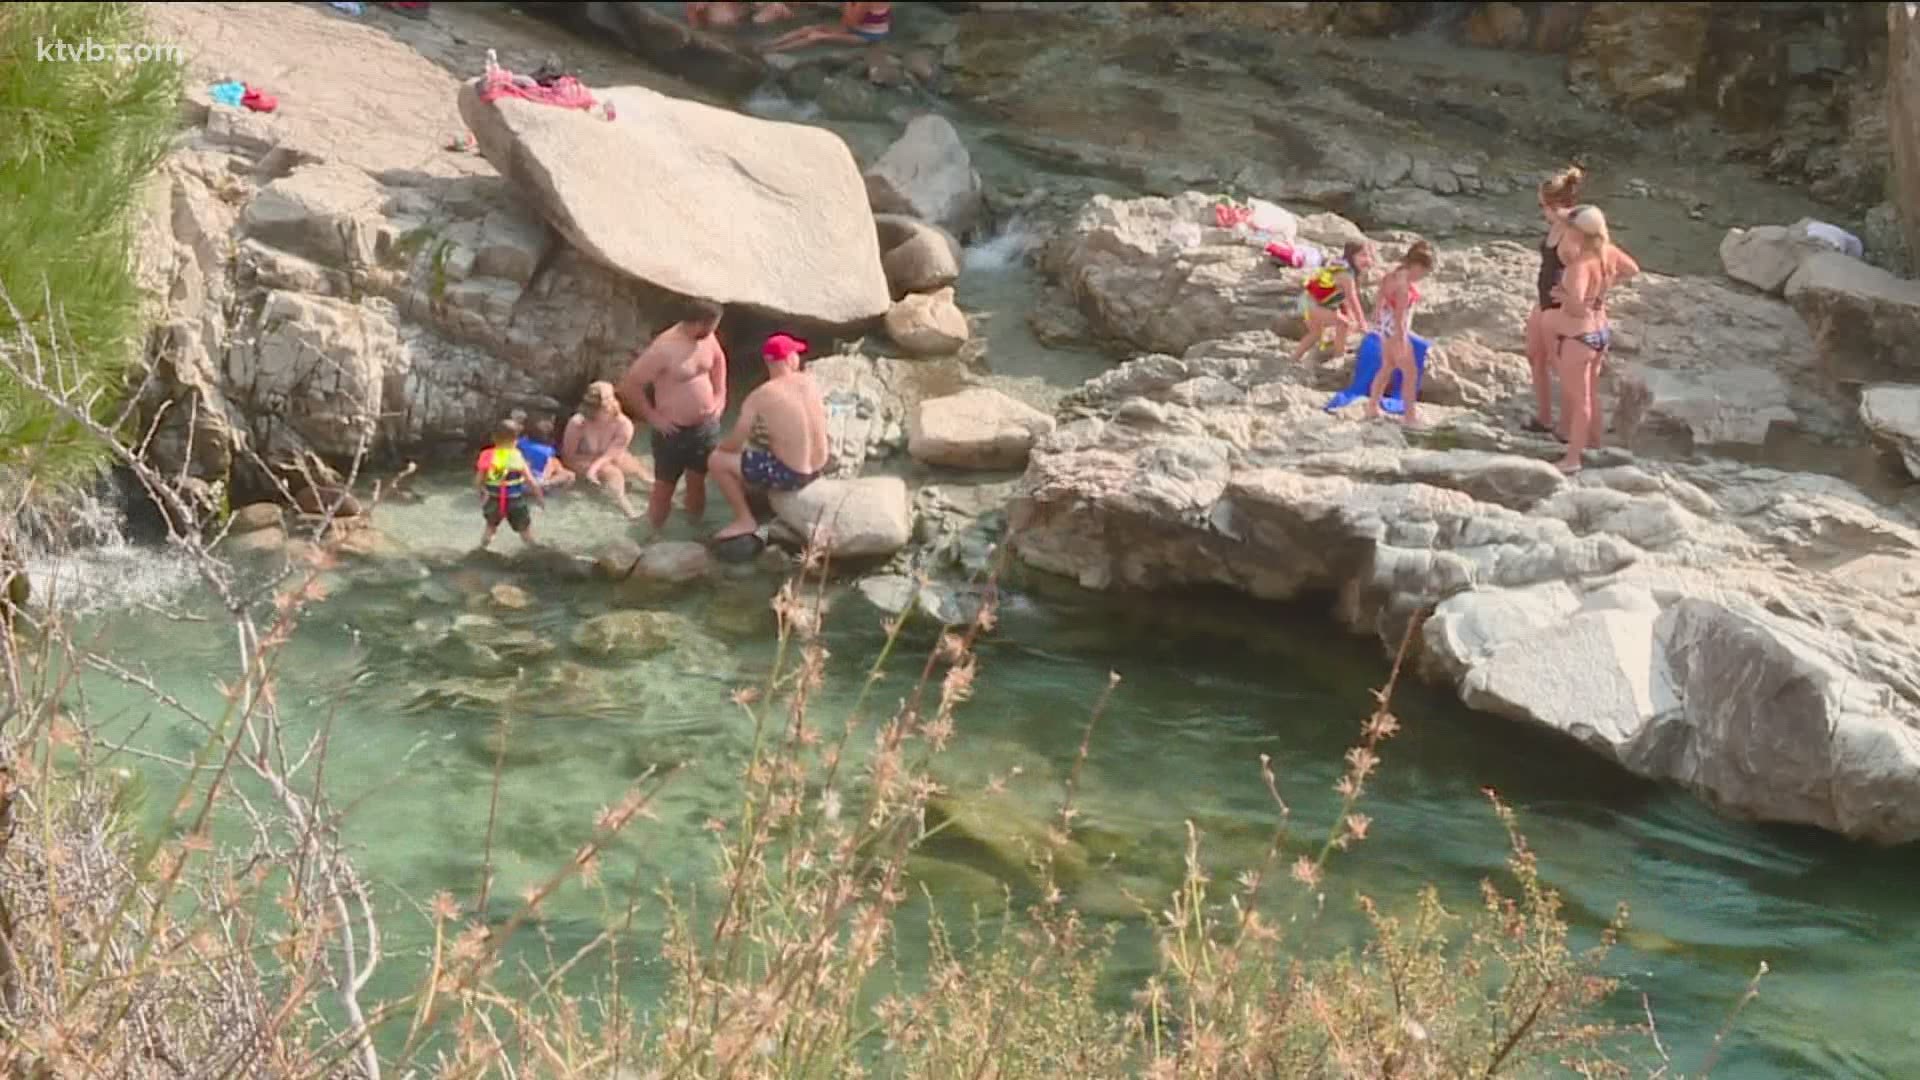 People come from all over to visit the popular hot springs, and the increased usage in recent months is apparent by the amount of trash left behind.